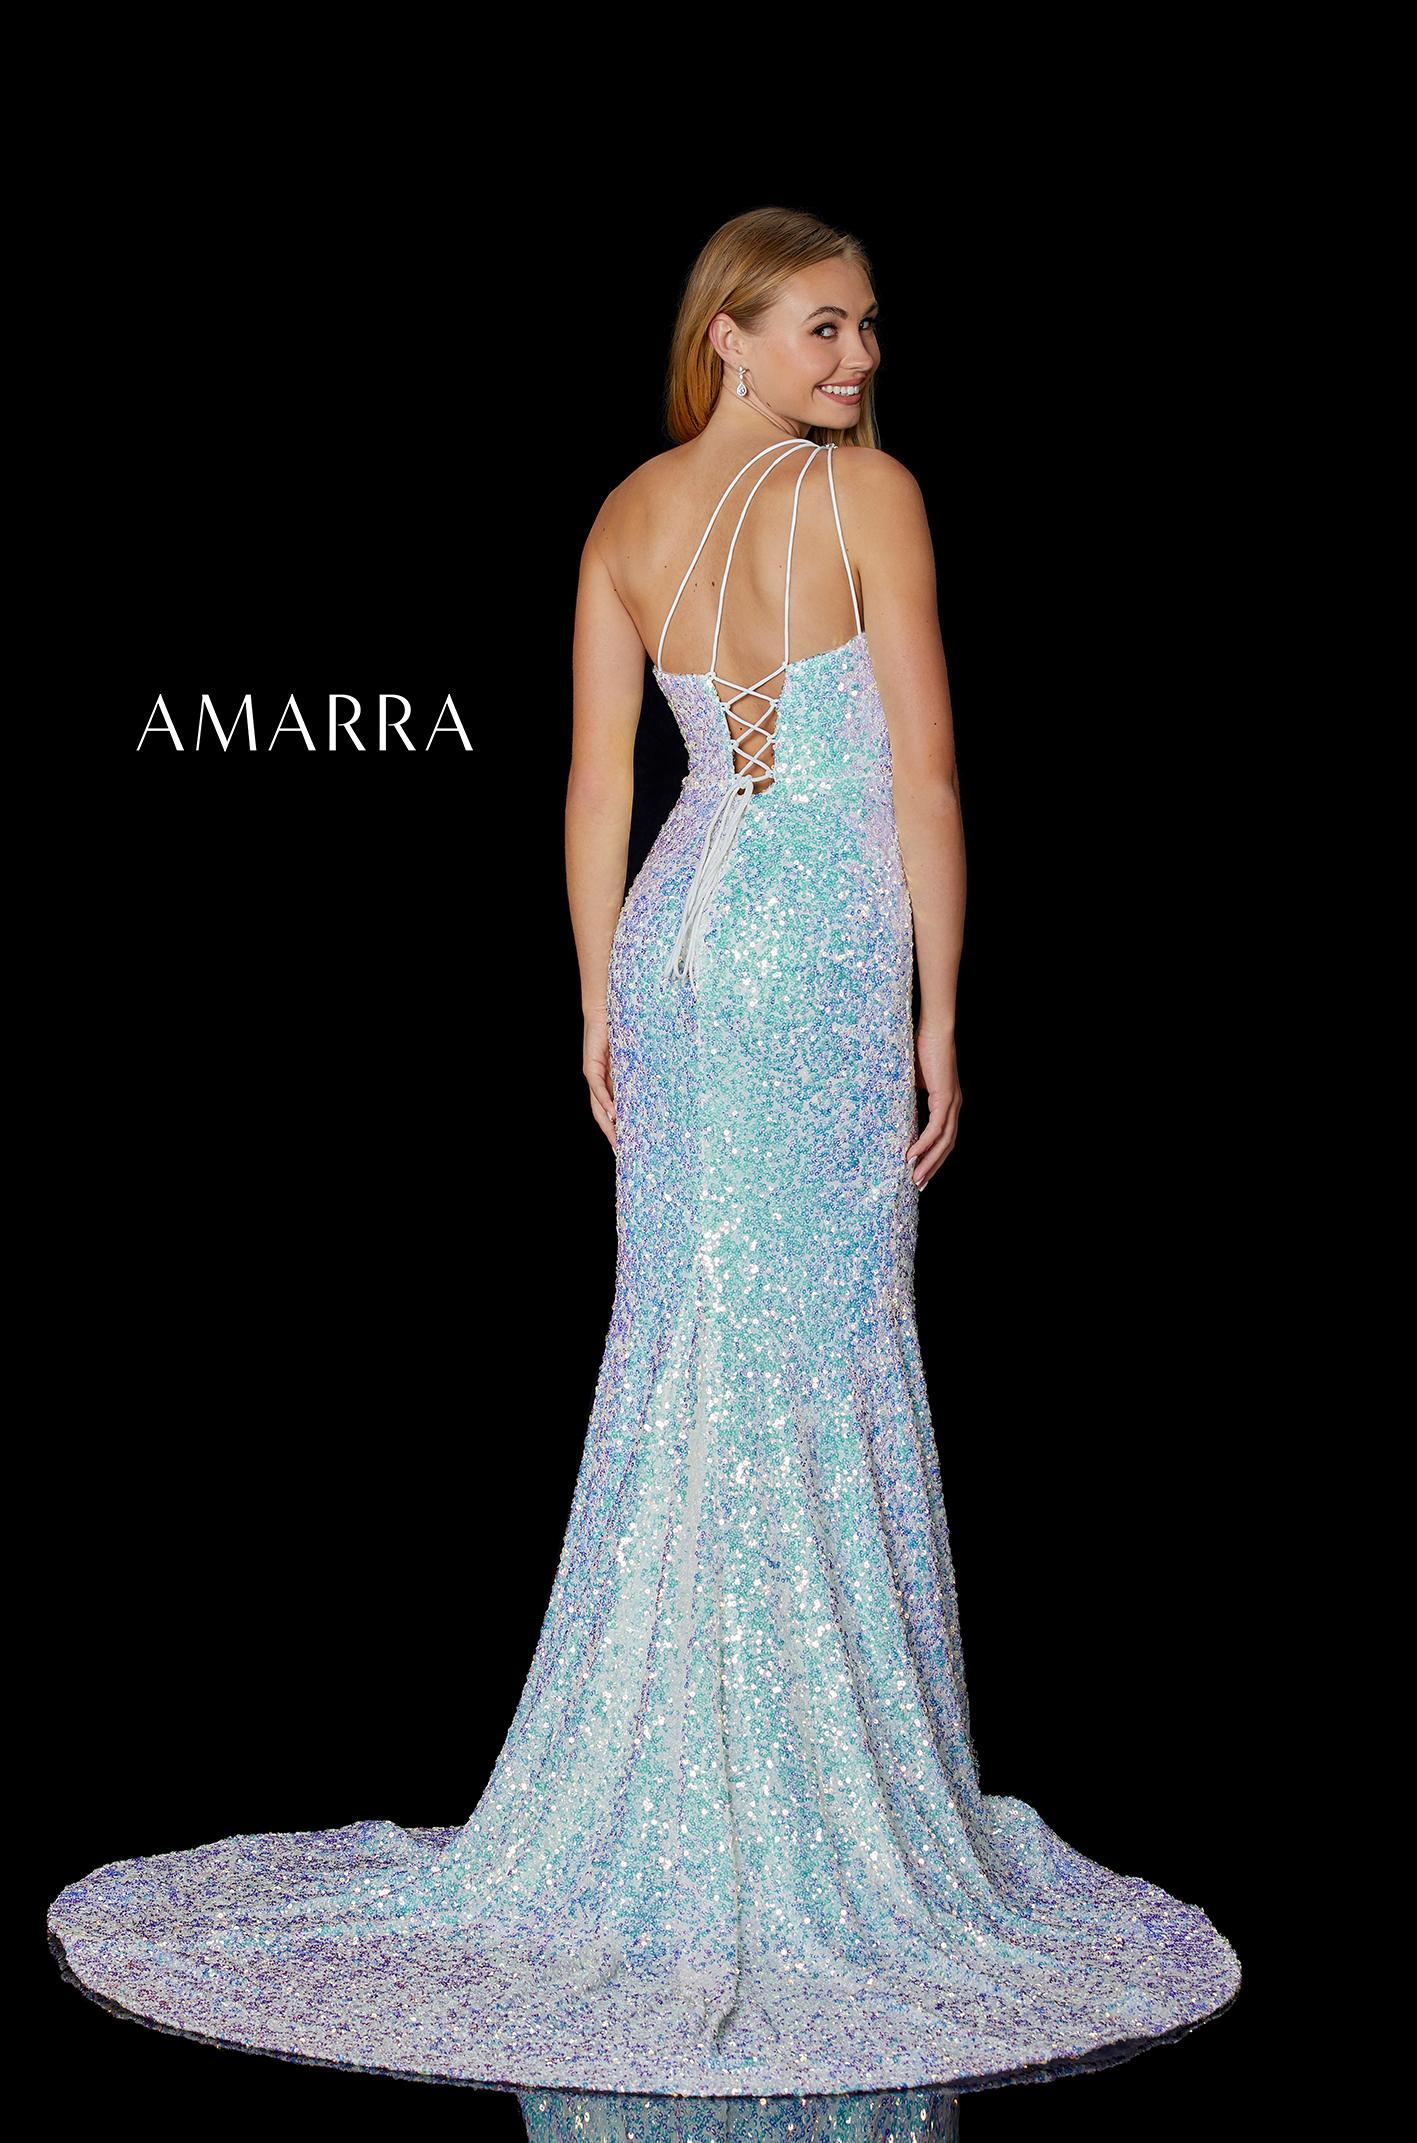 Amarra 87241 One Shoulder Sequin High Slit Open Corset Back Prom Dress Pageant Fitted one shoulder sequin gown featuring crystal beading on the straps, high leg slit, cut-out criss-cross back, and a sweep train.  Available Sizes: 00-16  Available Colors: Cotton Candy, Soft Pink